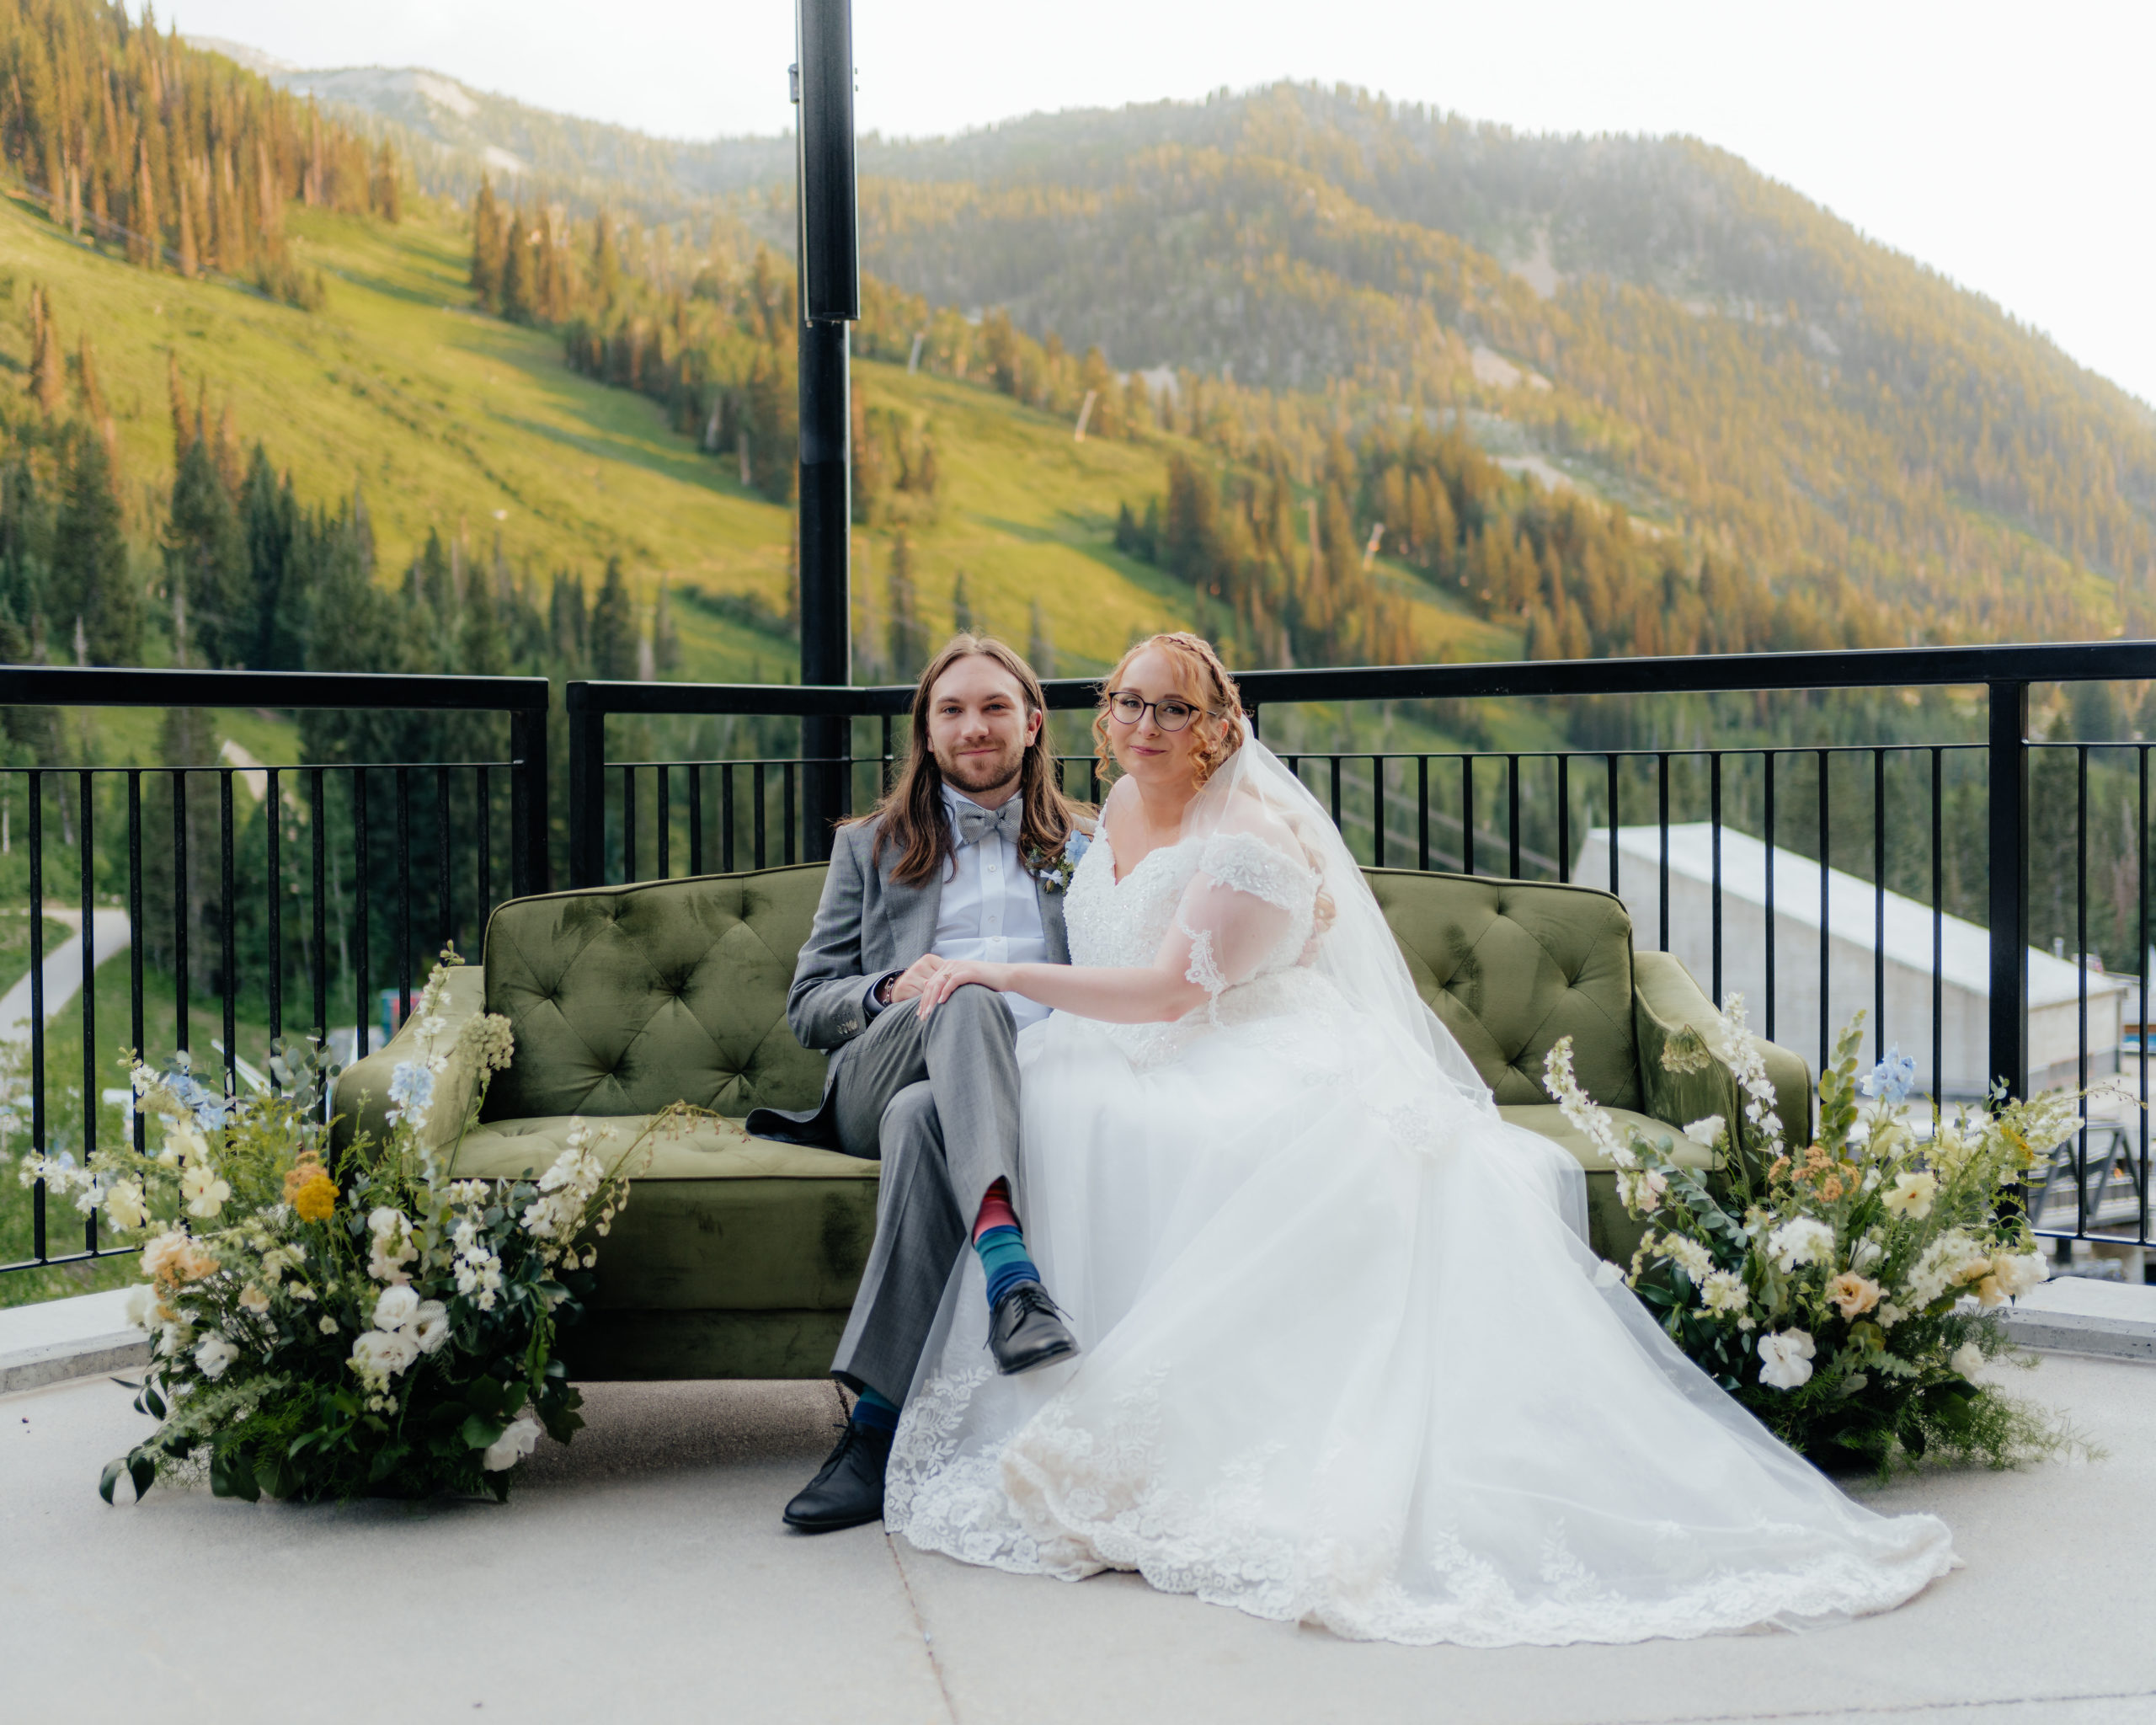 A wedding couple looks lovingly at the camera while sitting on a pretty green couch, wildflowers to their side and mountain trees as their backdrop.